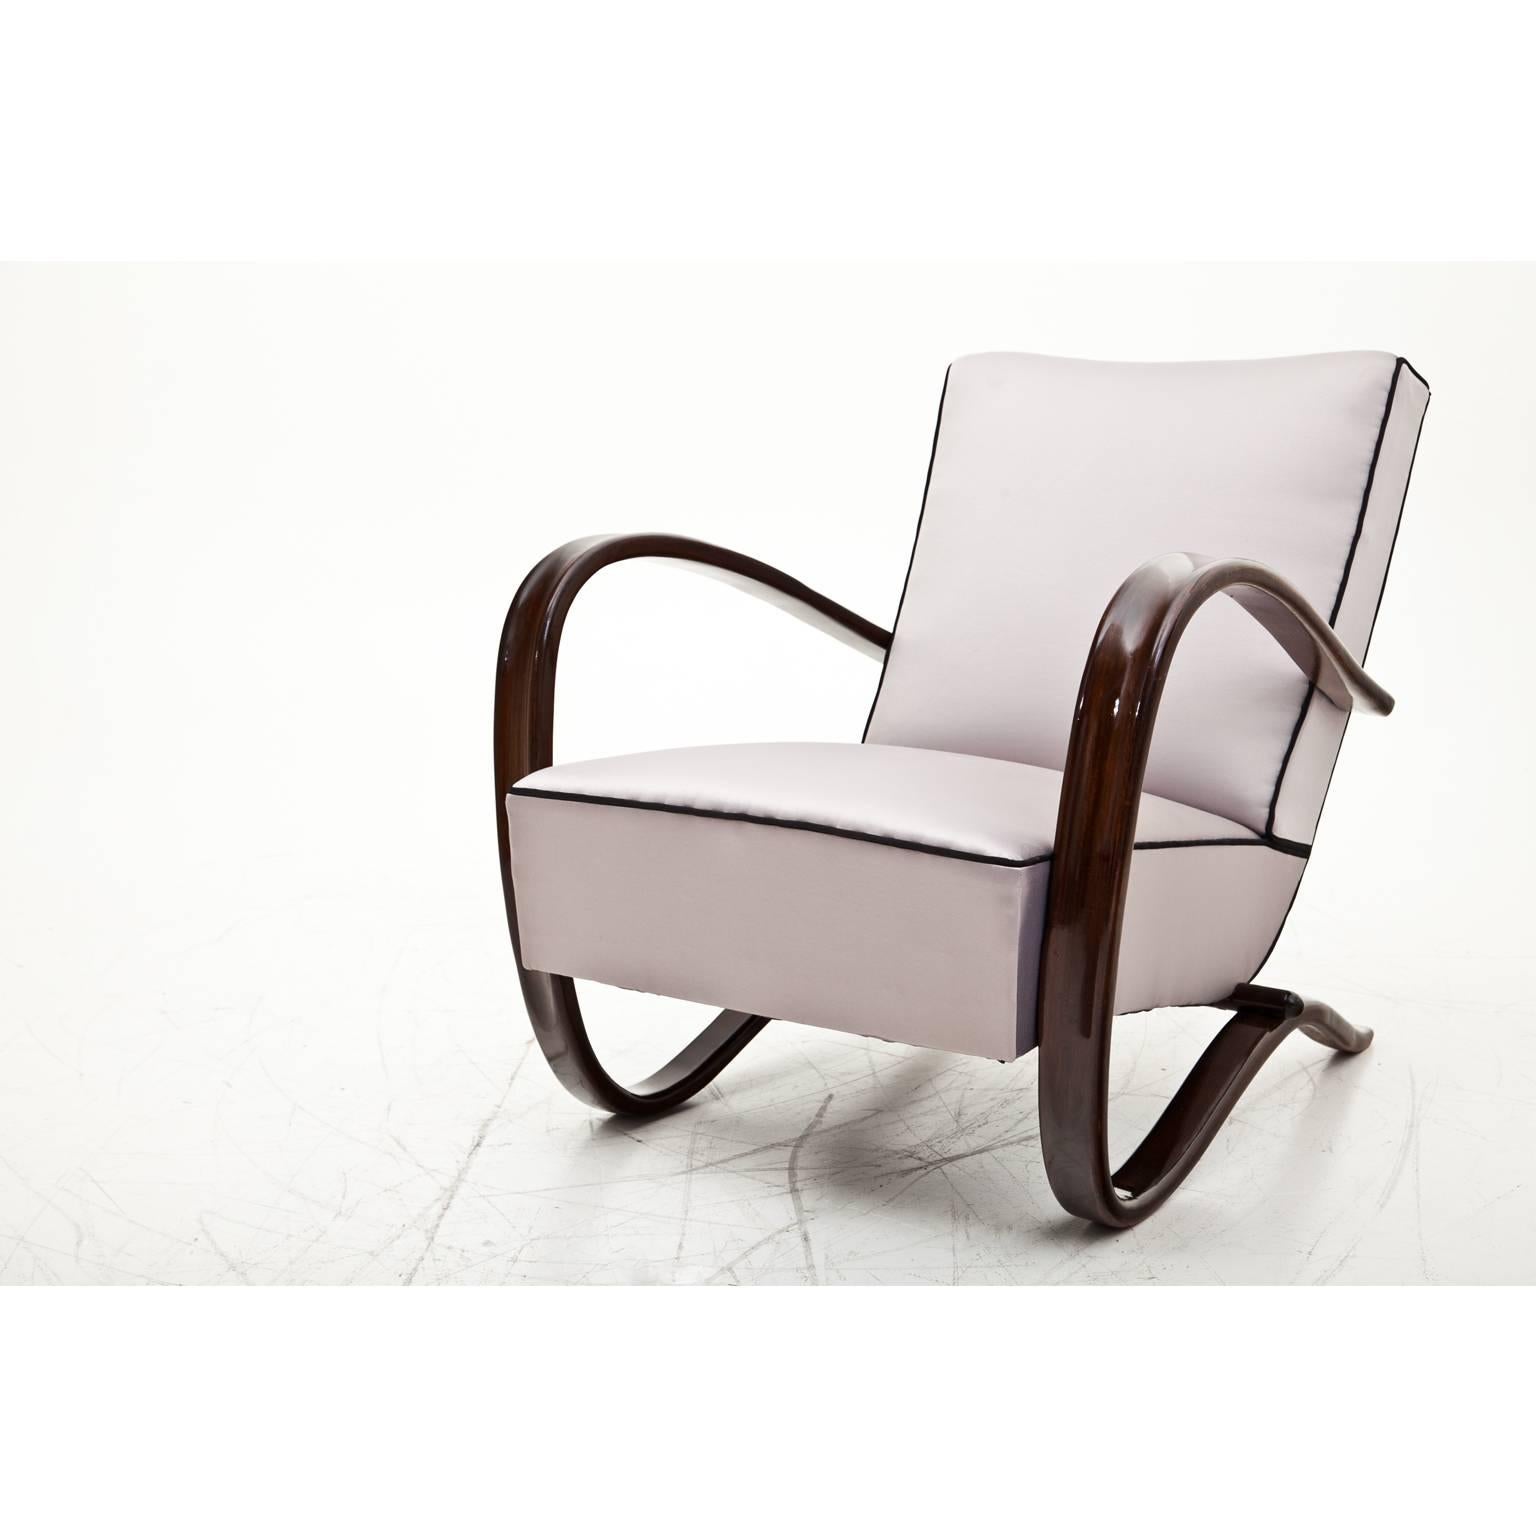 Iconic pair of chairs from the famous Czech designer Jindrich Halabala. The dark-stained armrests flow in an elegant c-shape around the side of the seating surface and become the frame of the chair. The chairs have been reupholstered with a very